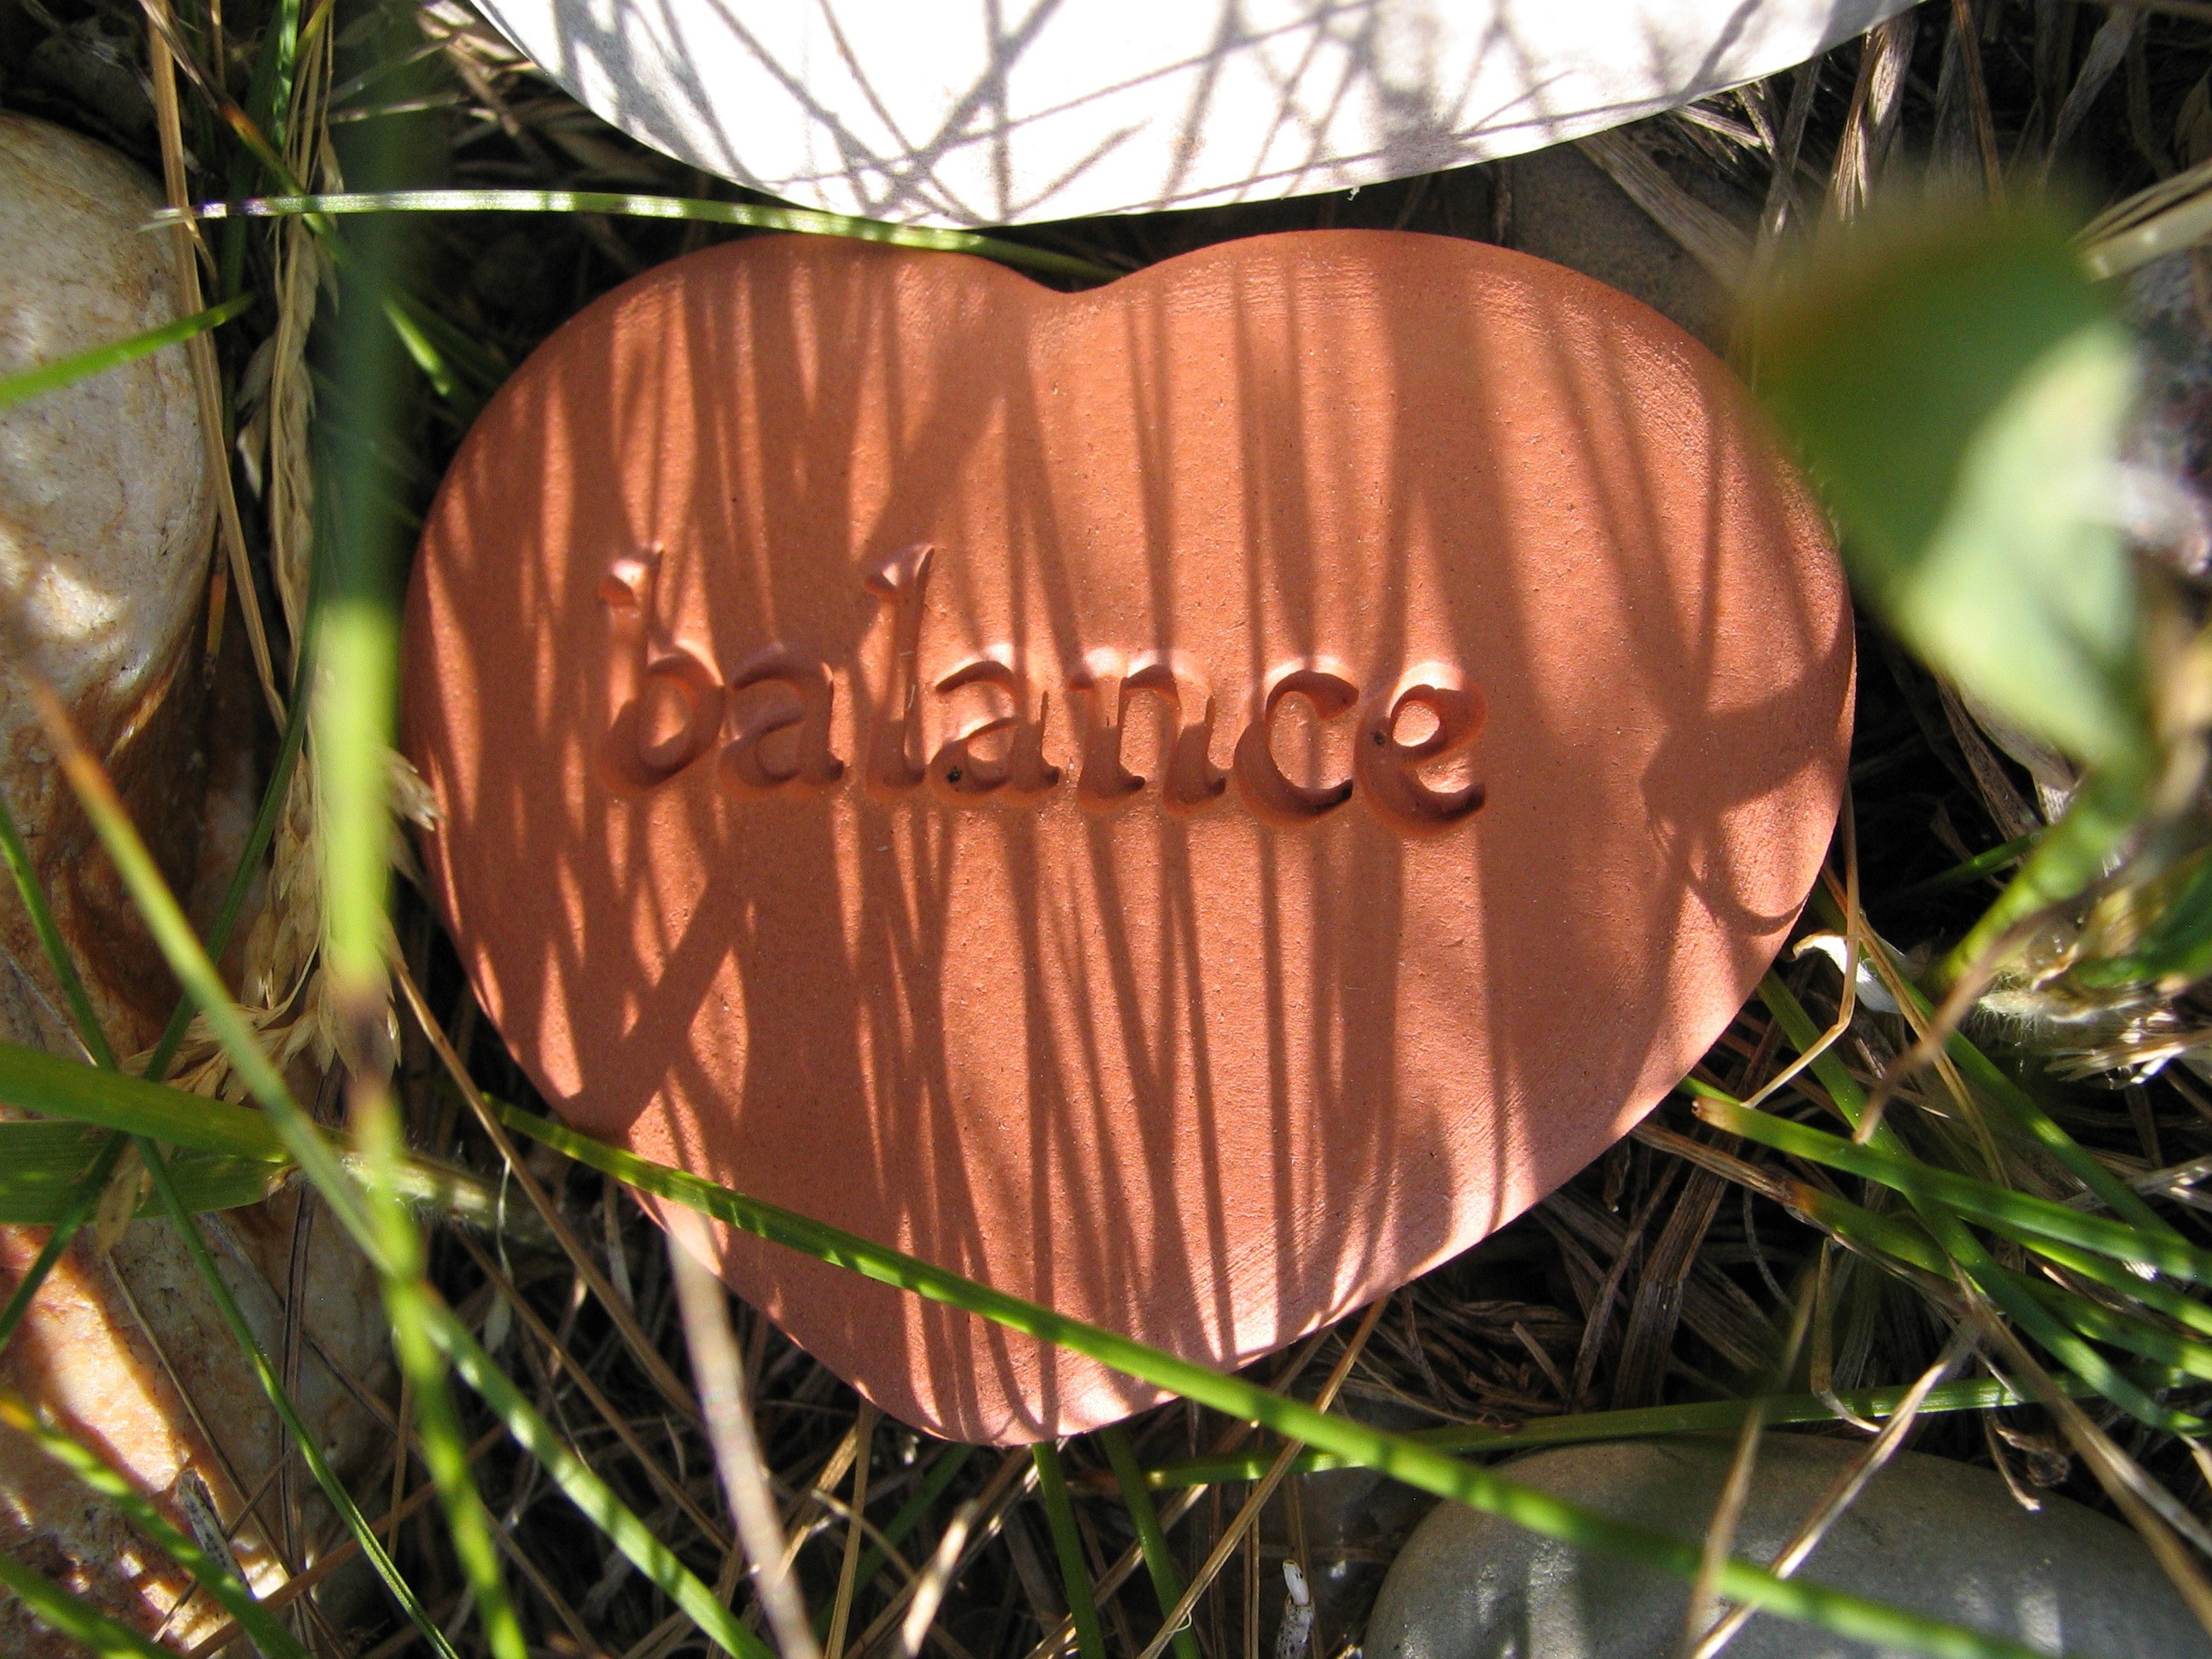 A ceramic heart with the word “balance” written on it